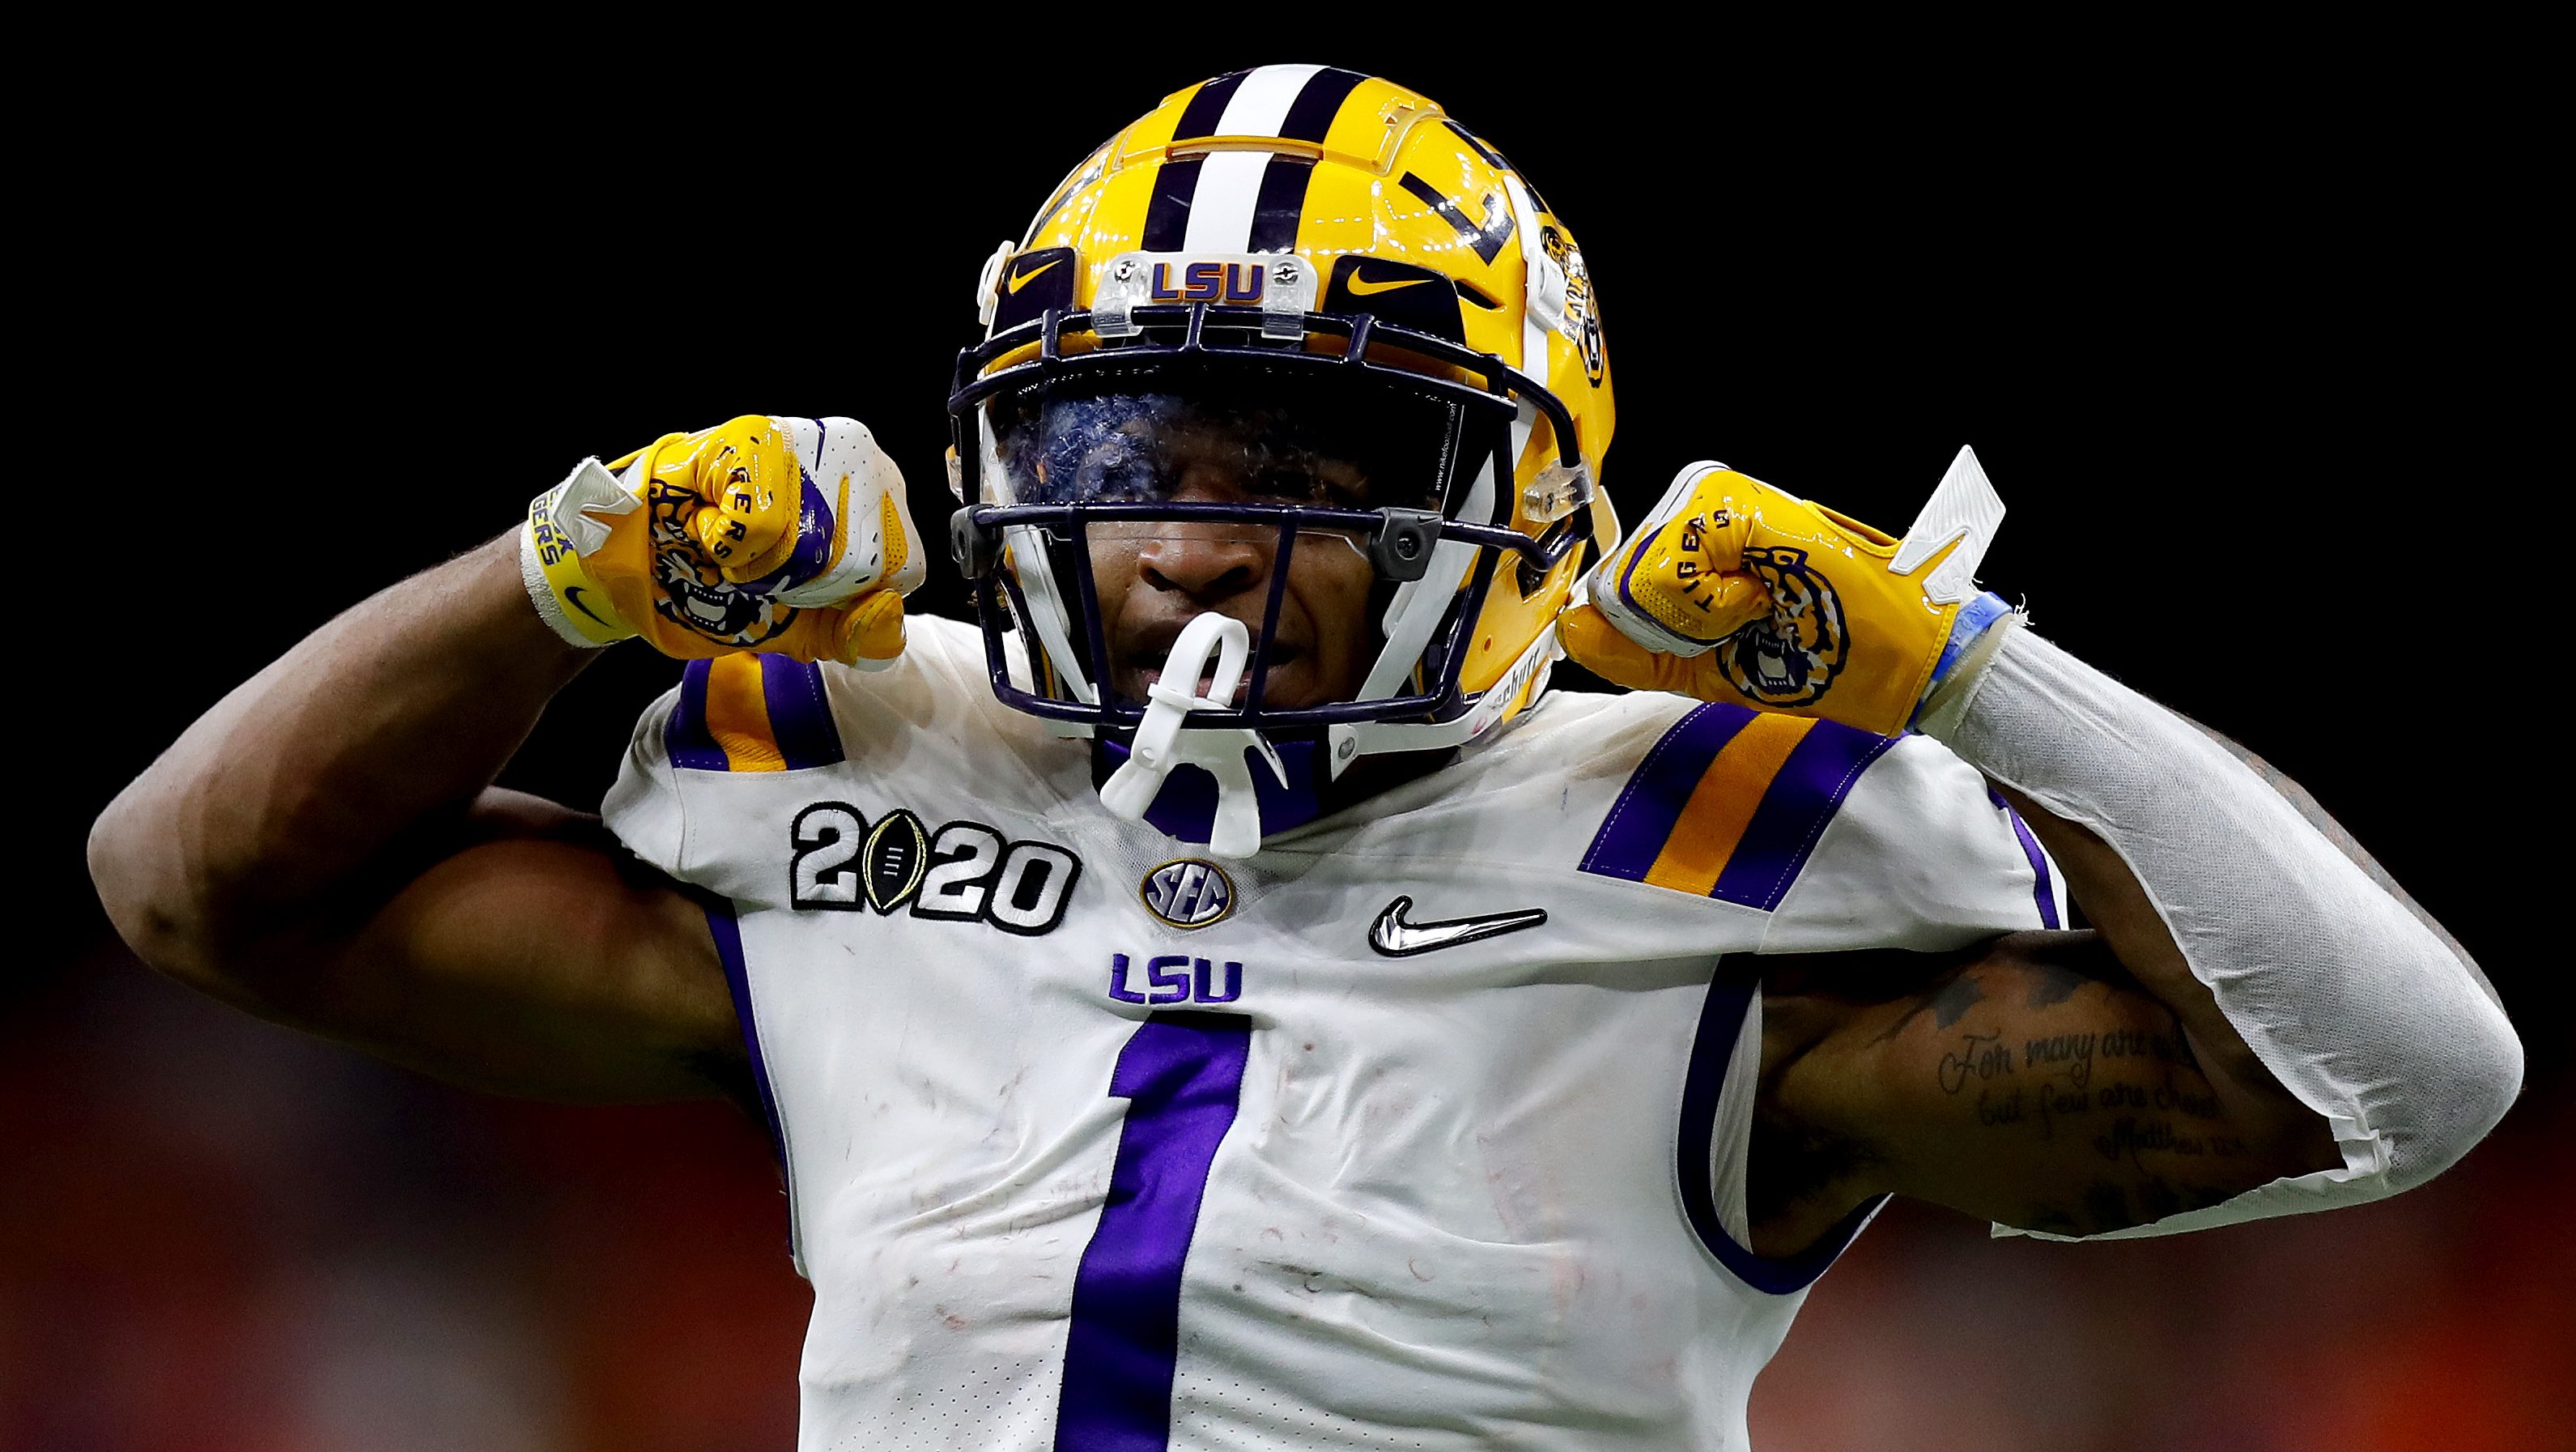 LSU WR Leads Eagles Draft Prospects, Path to Playoffs Still Exists